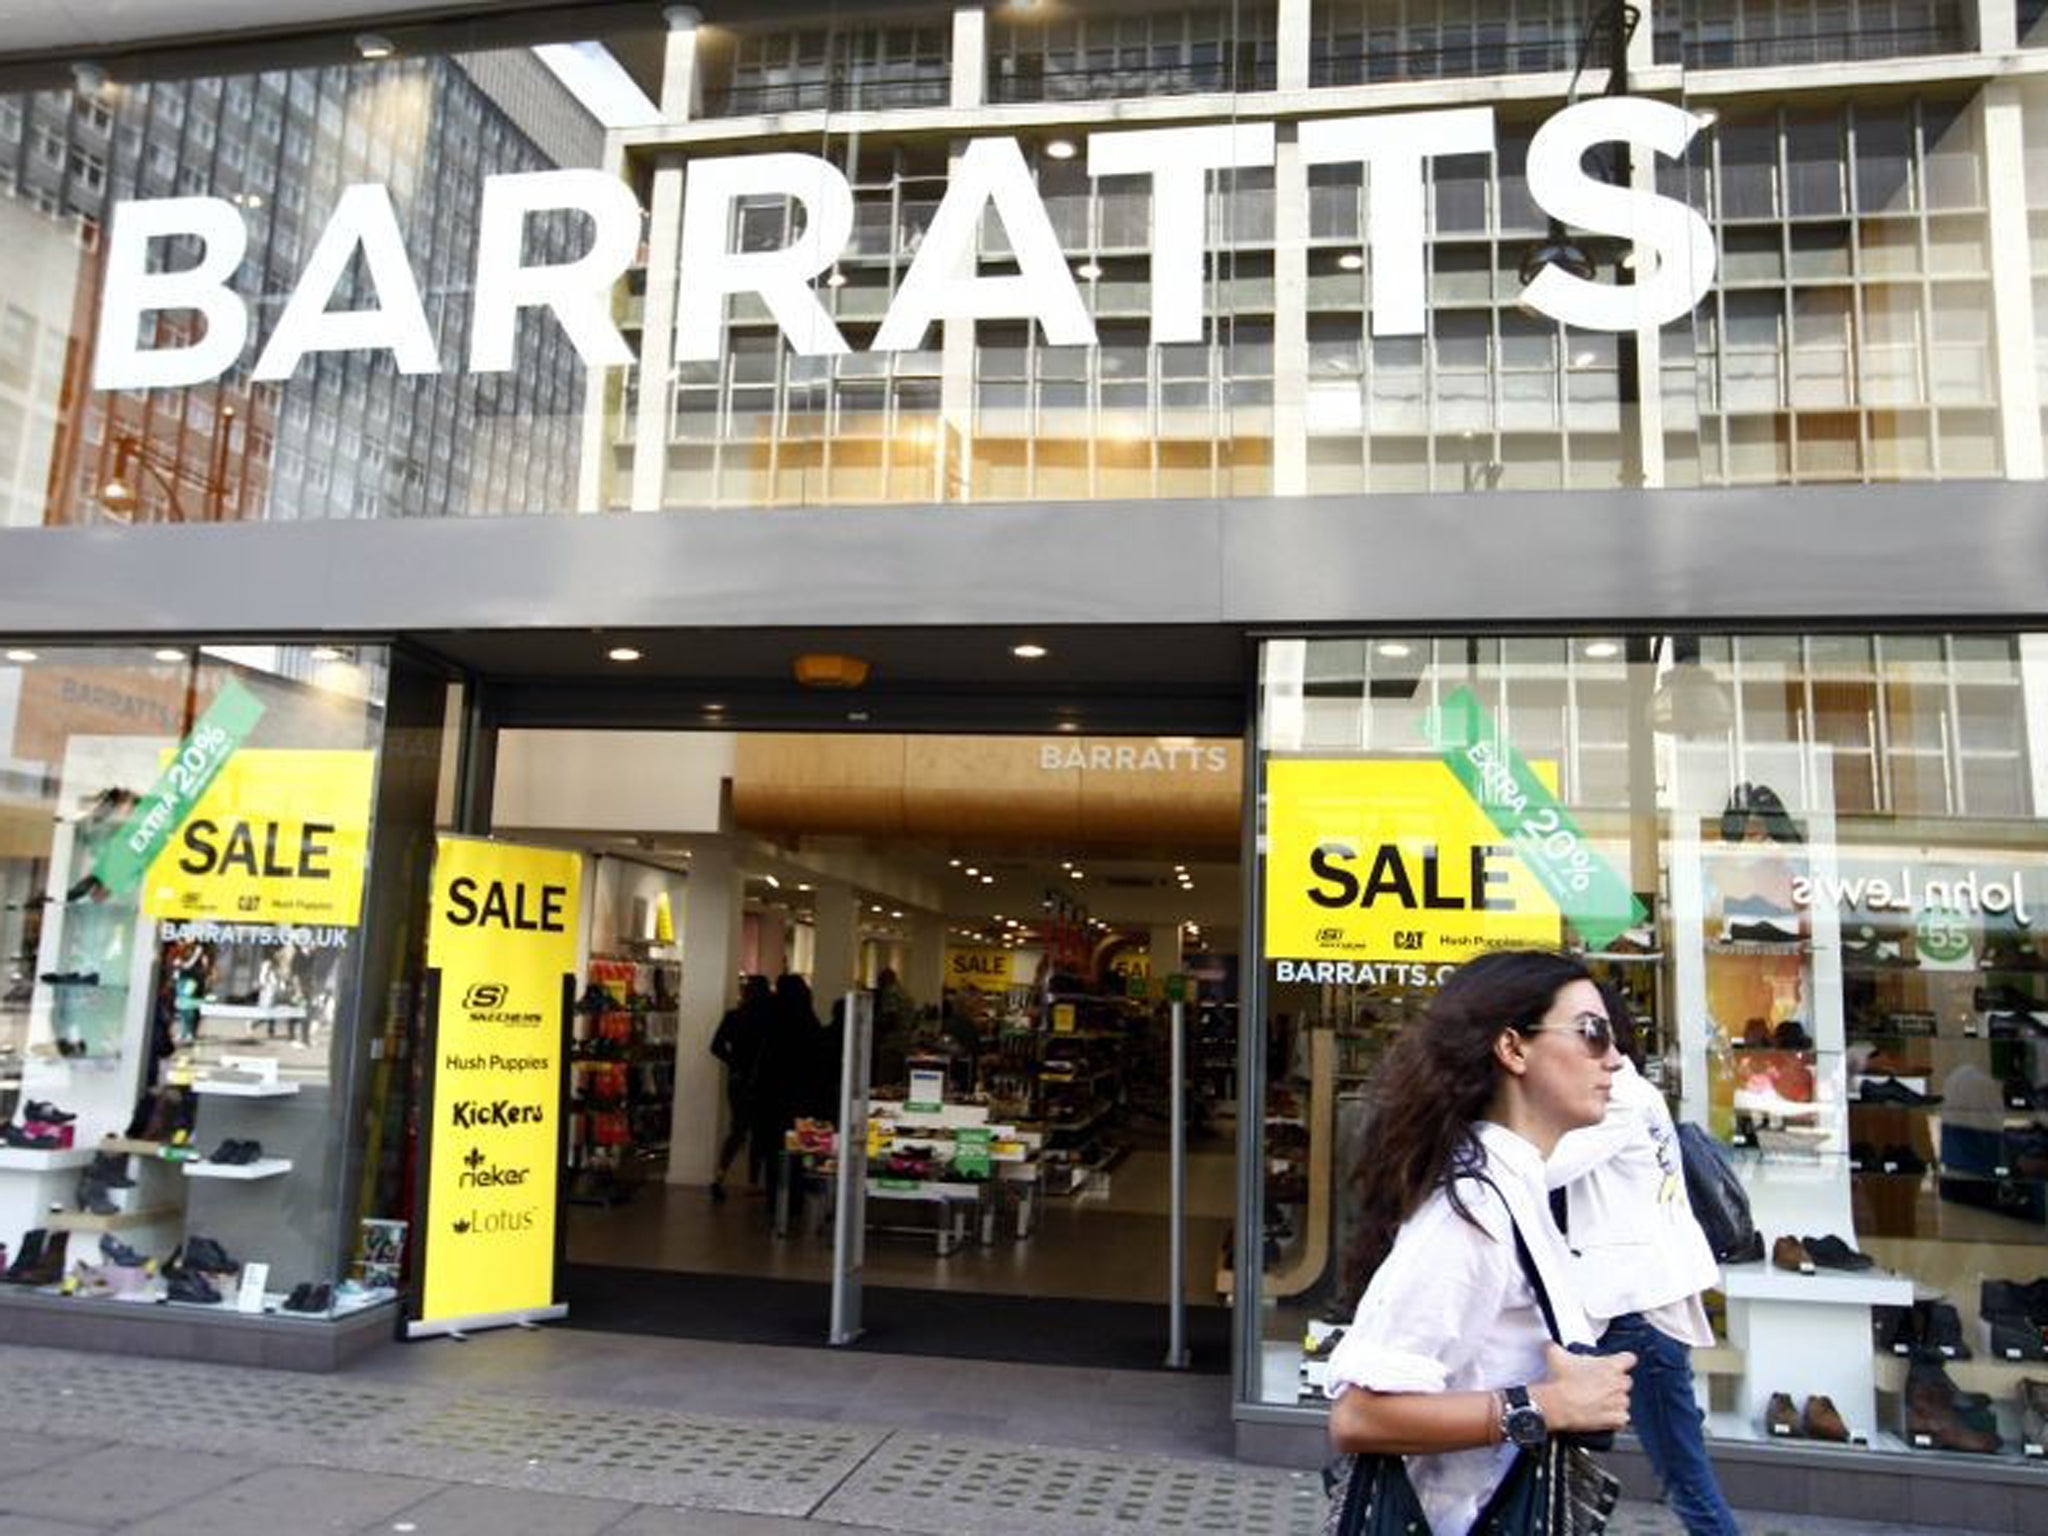 Barratts Shoes has gone into administration for the third time in four years